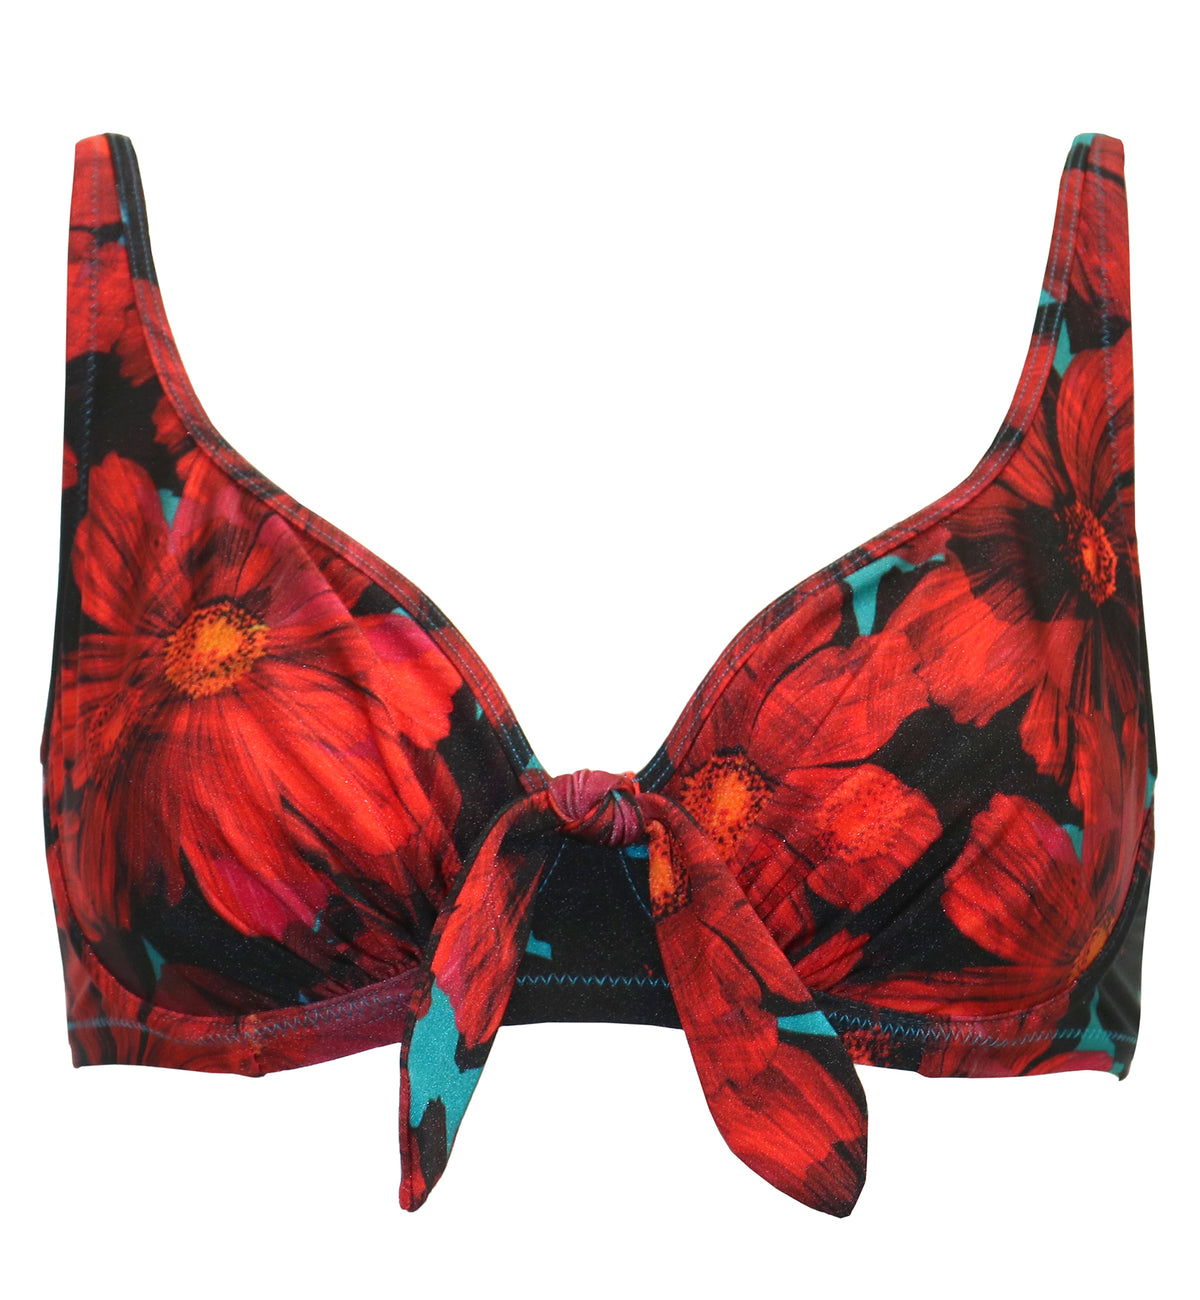 Pour Moi Orchid Luxe Non Padded Underwire Swim Top (12902),32E,Red/Teal - Red/Teal,32E